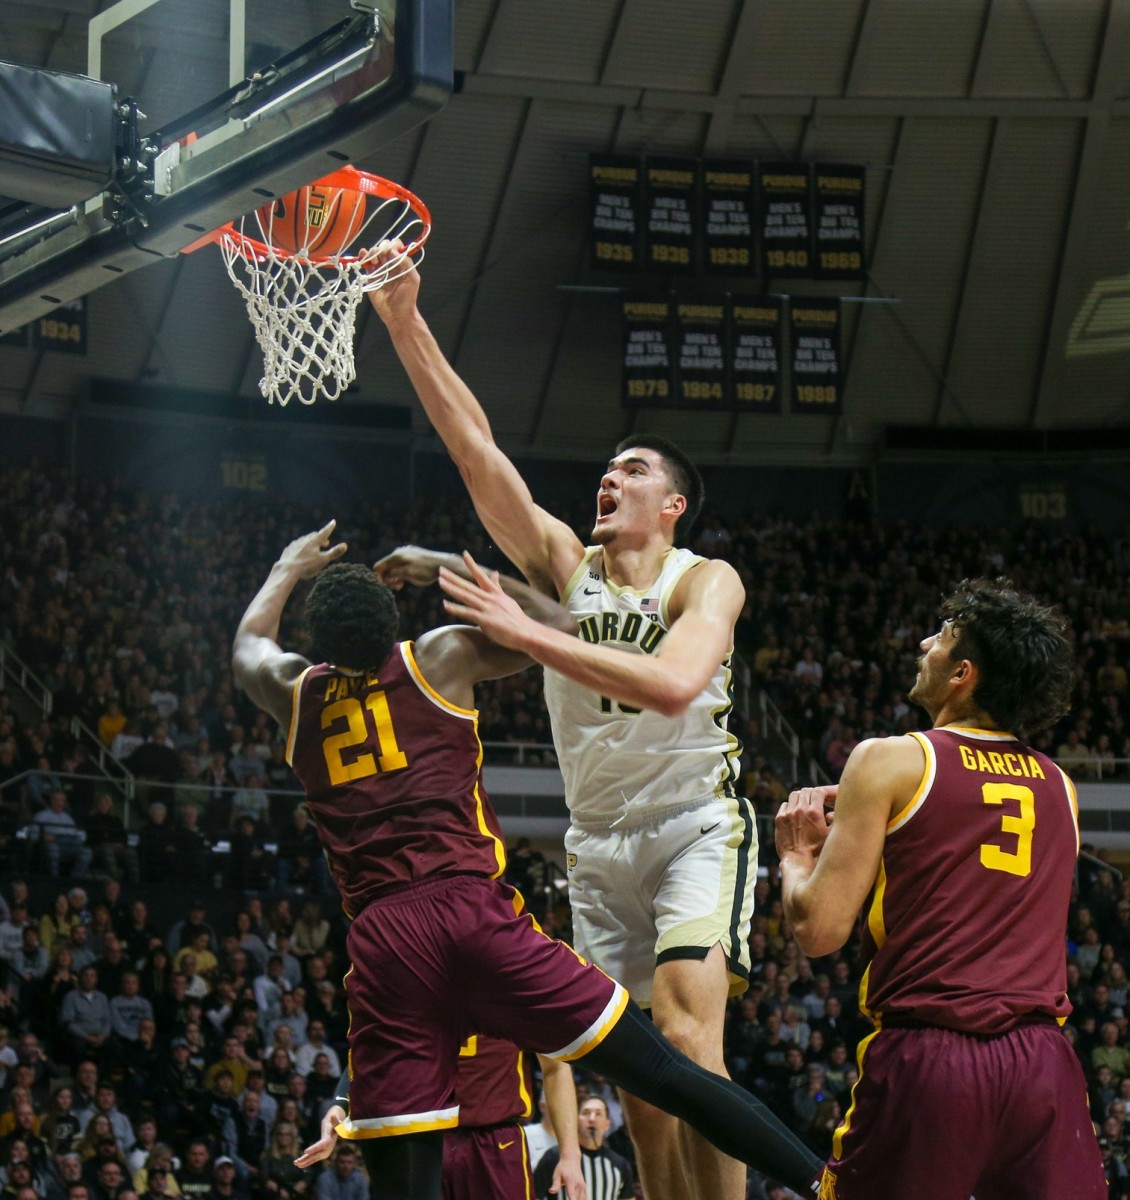 Purdue Boilermakers center Zach Edey (15) dunks the ball over Minnesota Gophers forward Pharrel Payne (21) during the NCAA men's basketball game against the Minnesota Gophers, Sunday, Dec. 4, 2022, at Mackey Arena in West Lafayette, Ind.